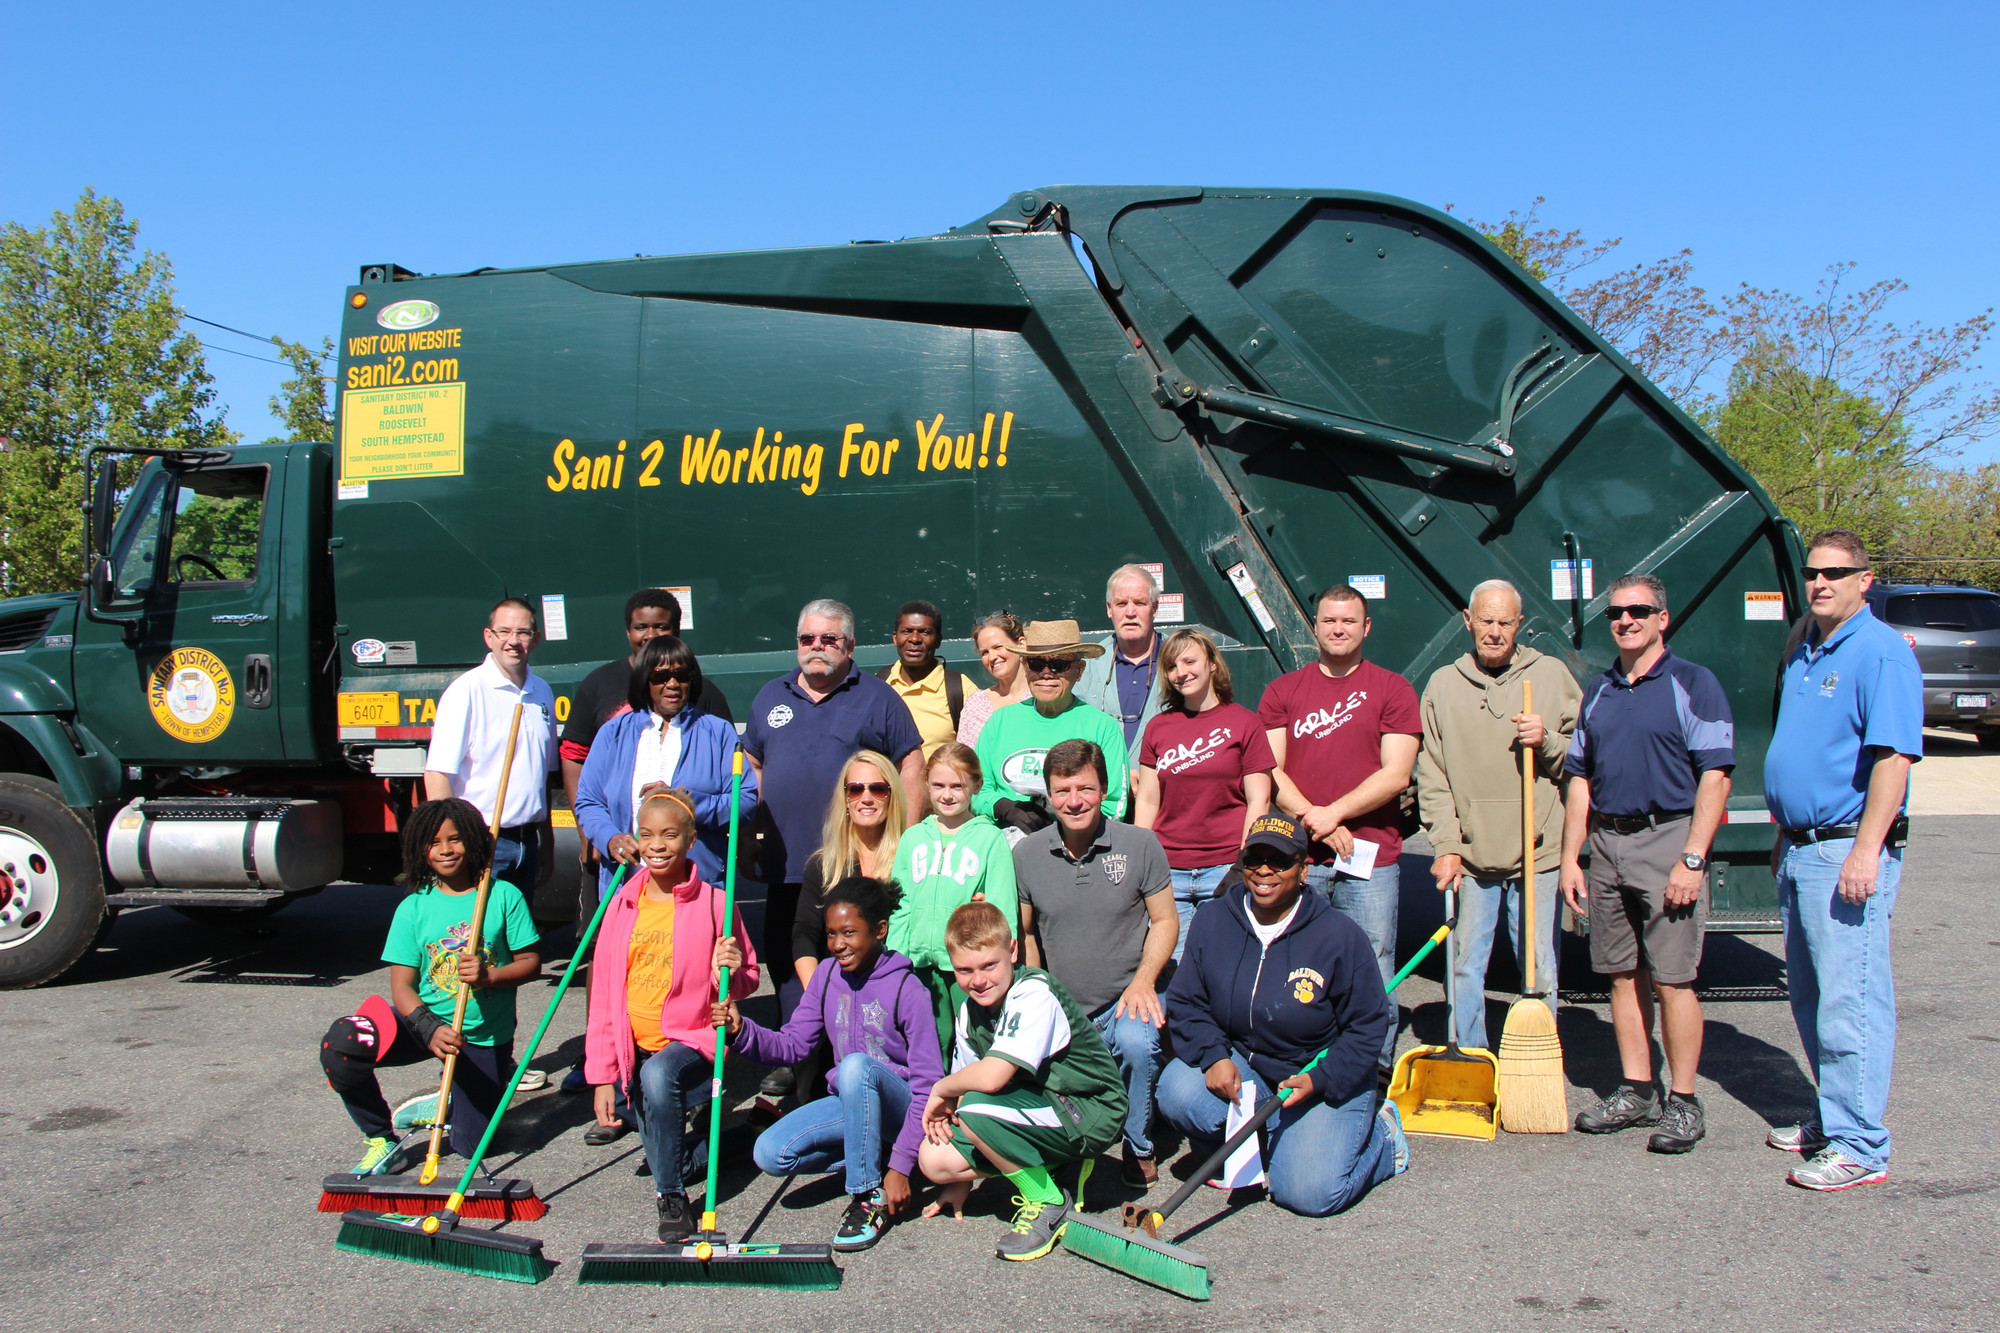 t’s a Clean Sweep in Baldwin. Members of several organizations in Baldwin and the Town of Hempstead came out on May 17 for Sanitary District No. 2’s Big Sweep 2014.